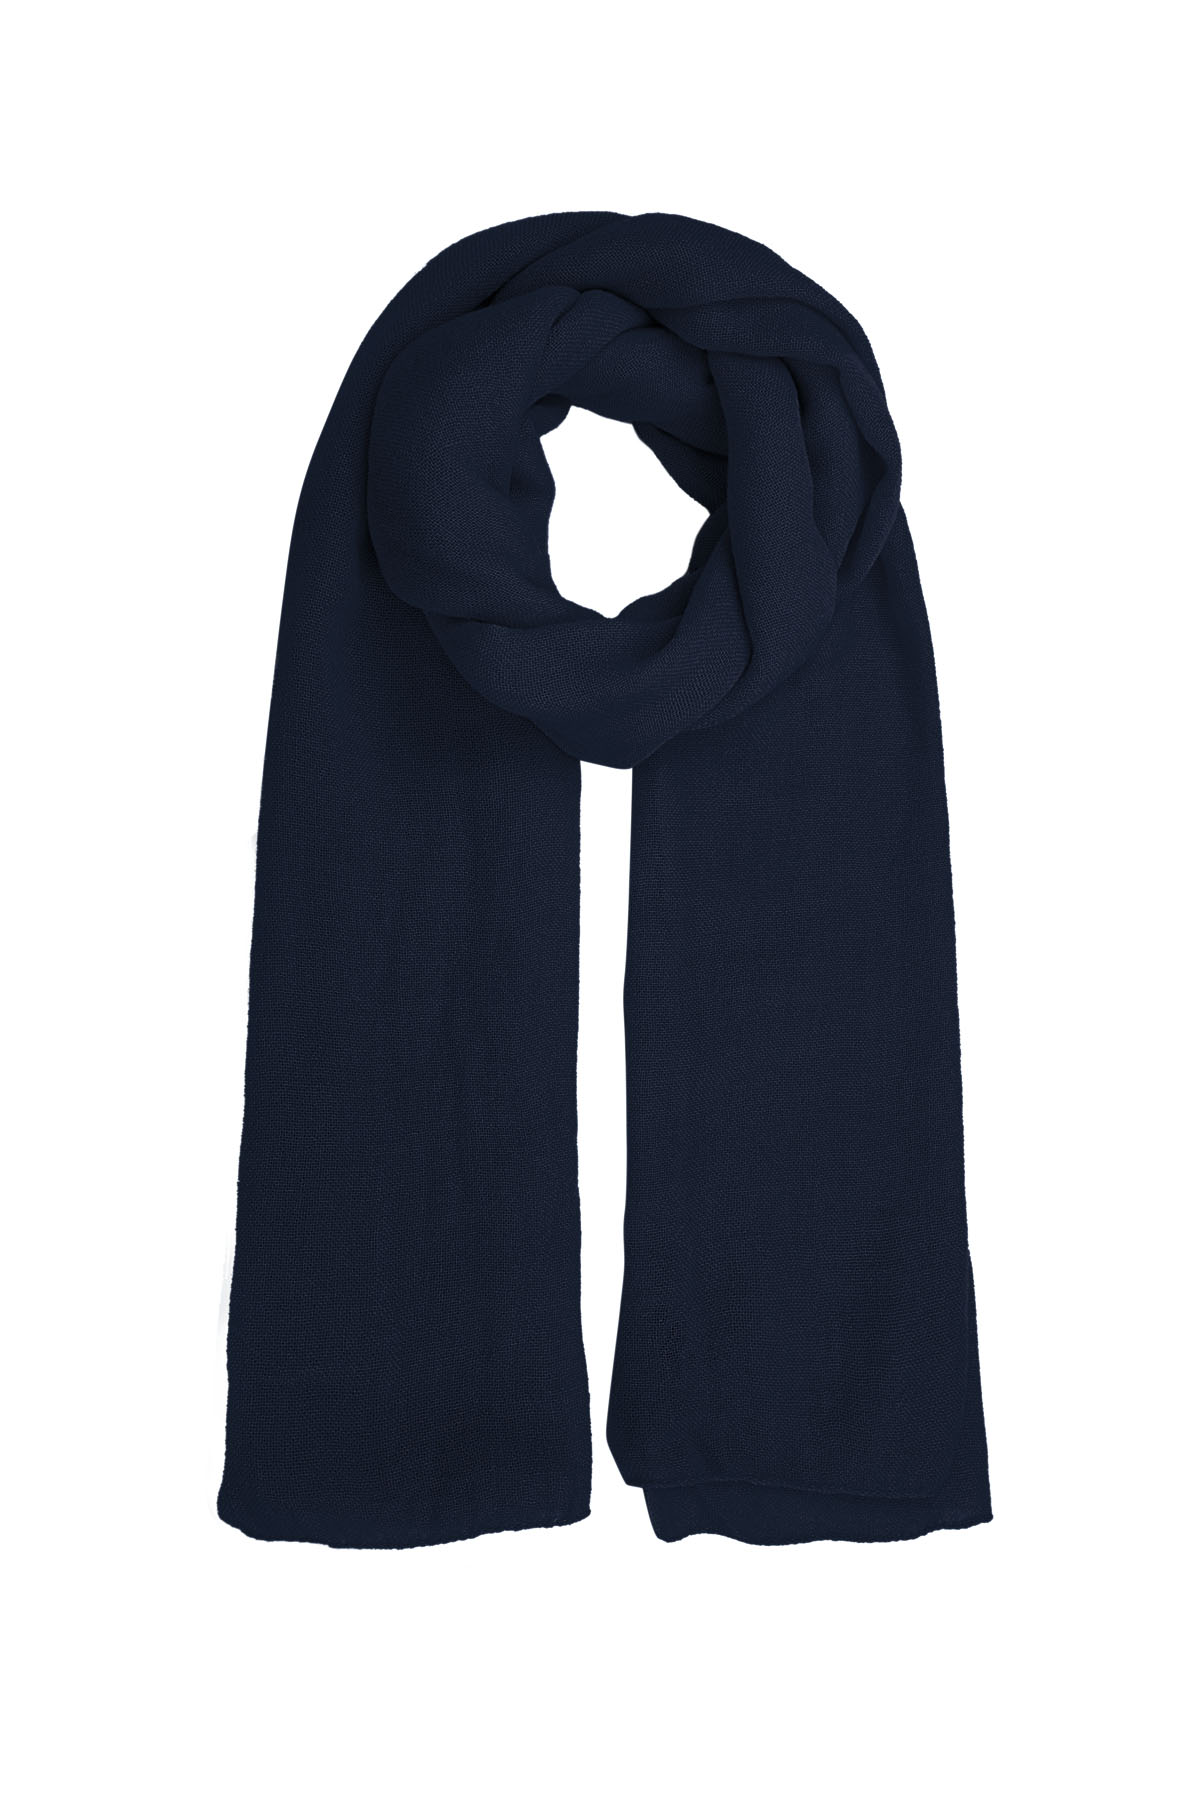 Scarf solid color - navy blue h5 